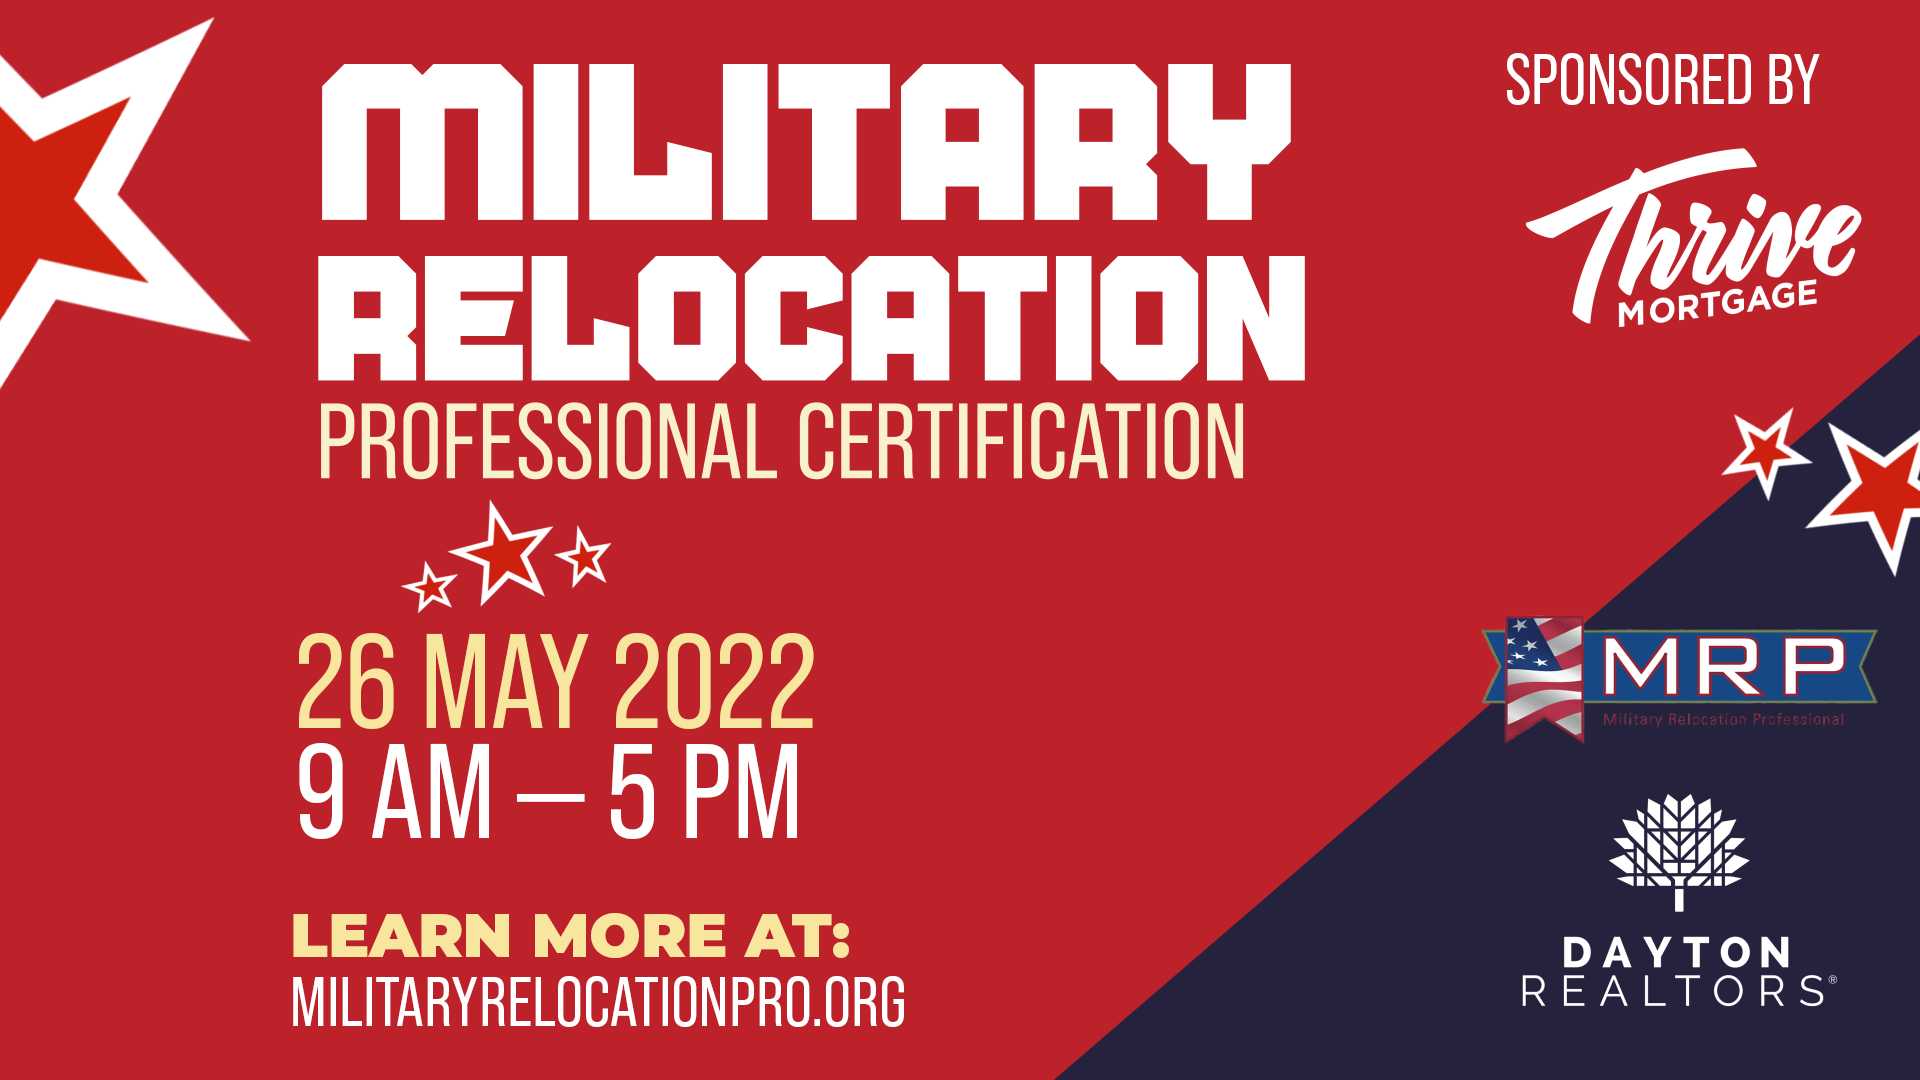 Military Relocation Professional Certification, May 26